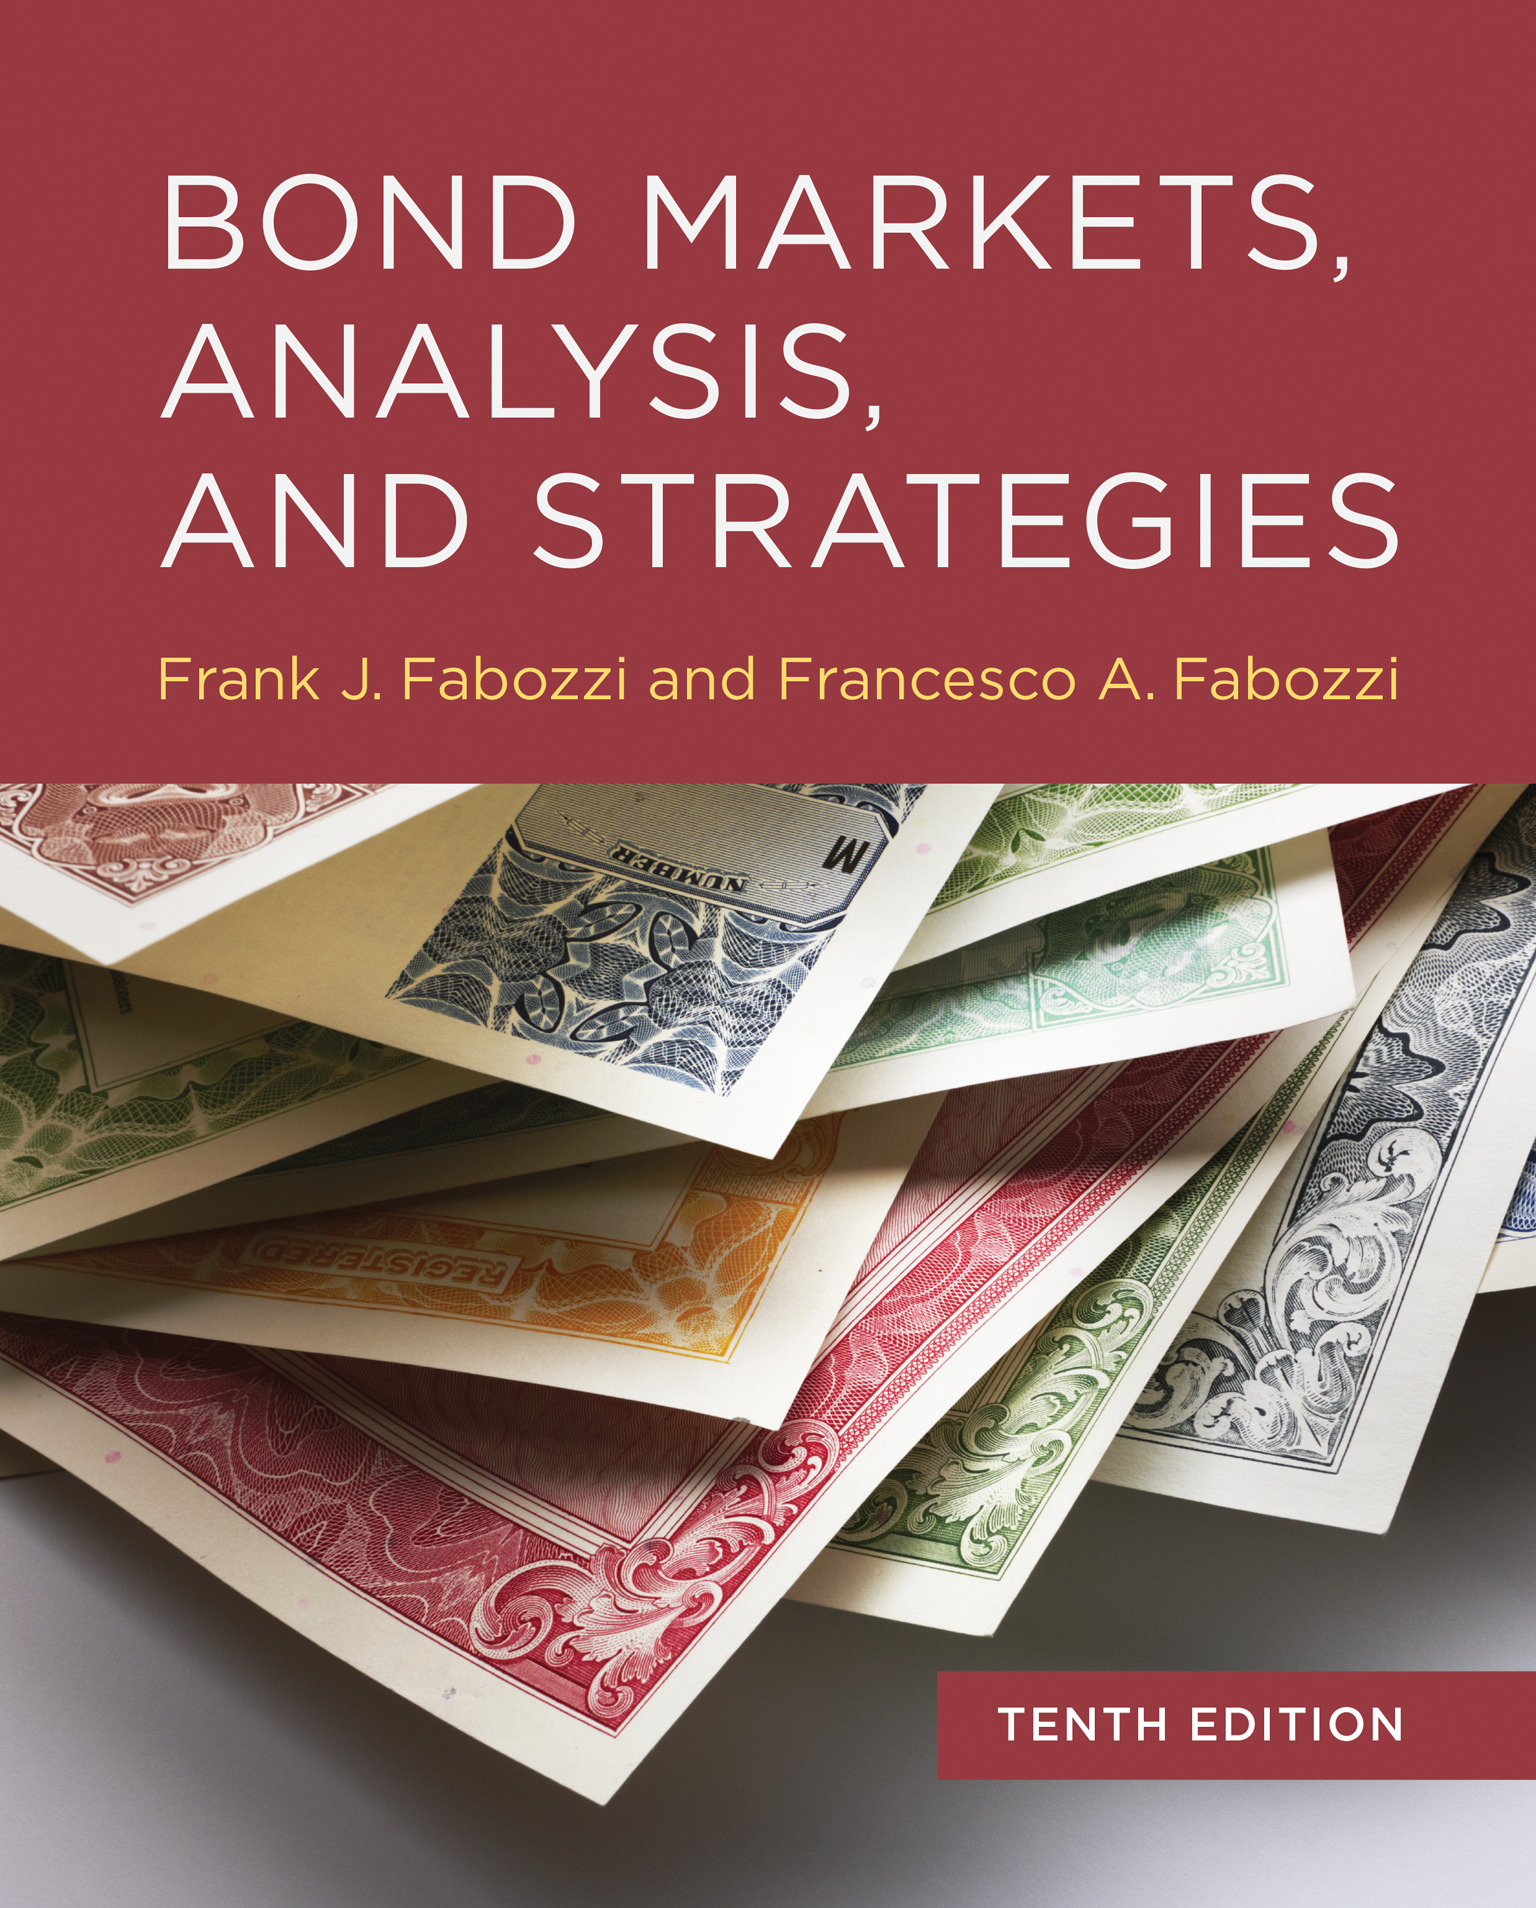 Bond Markets, Analysis, and Strategies, tenth edition